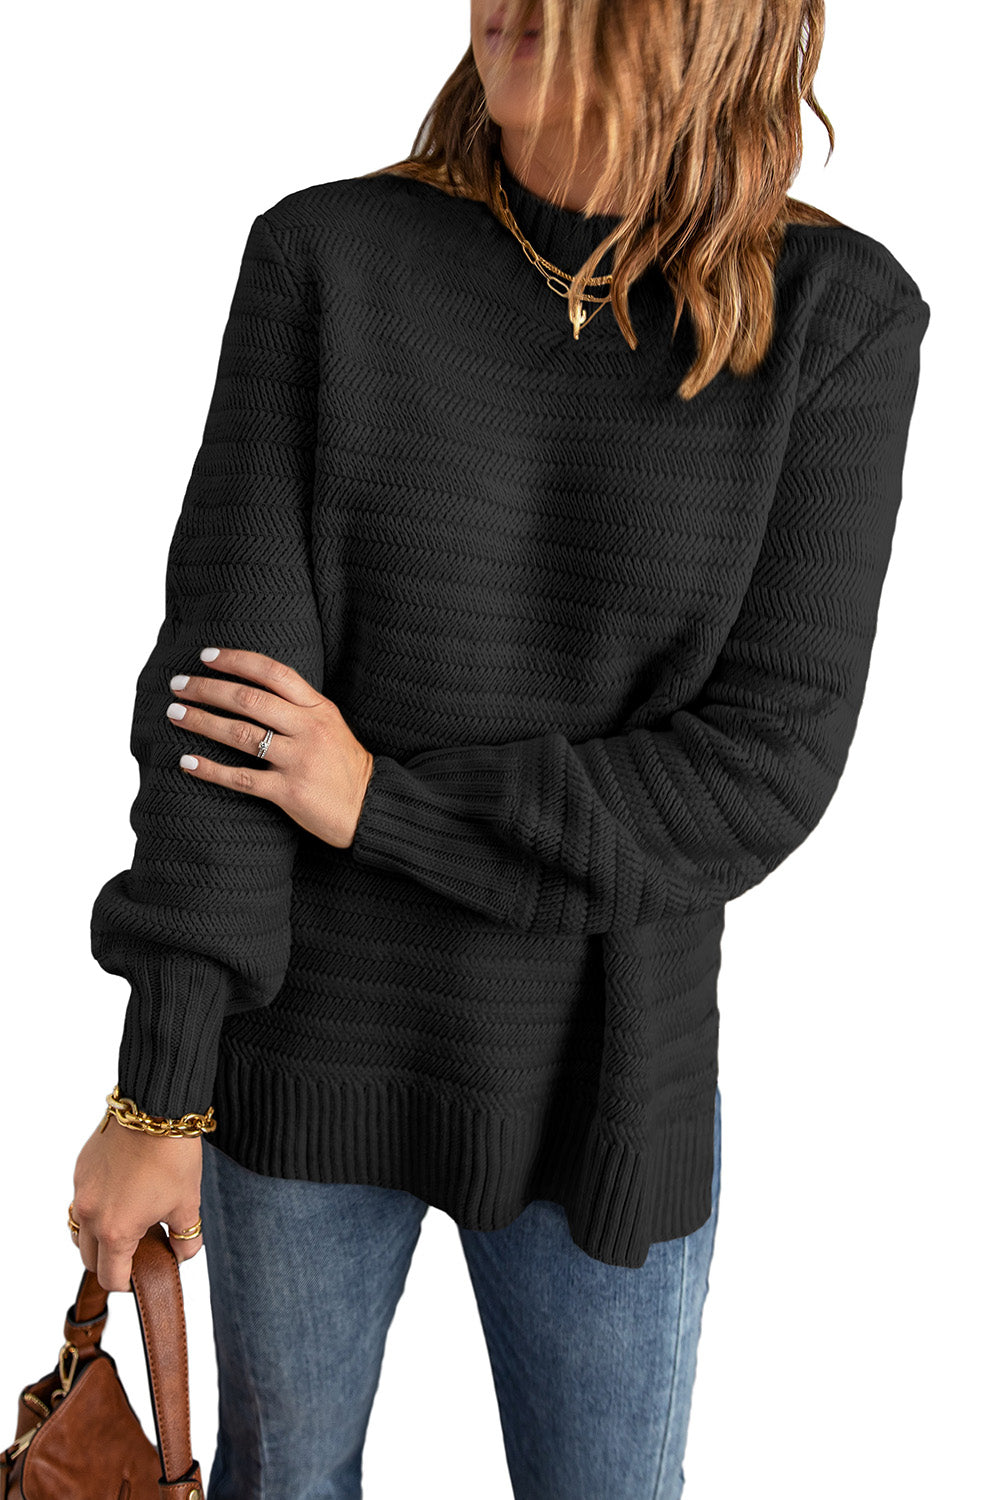 Black Solid Color Stand Collar Textured Sweater